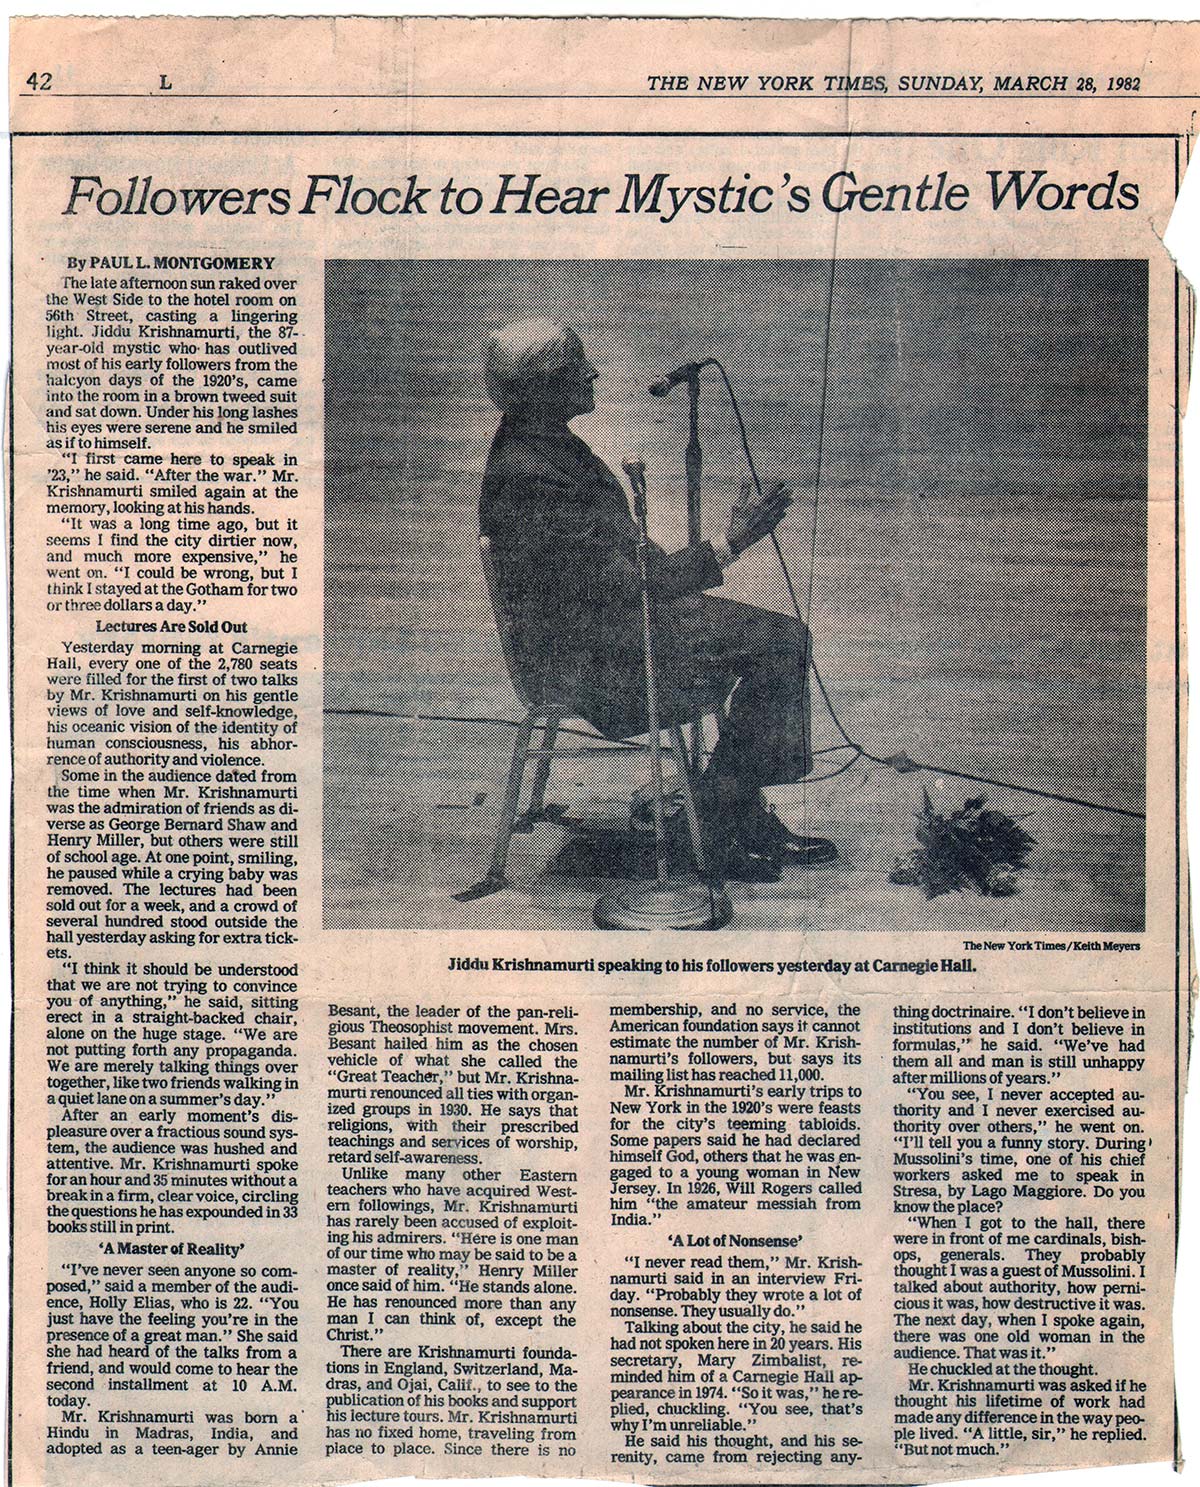 1982 The New York Times - Followers Flock to Hear a Mystic